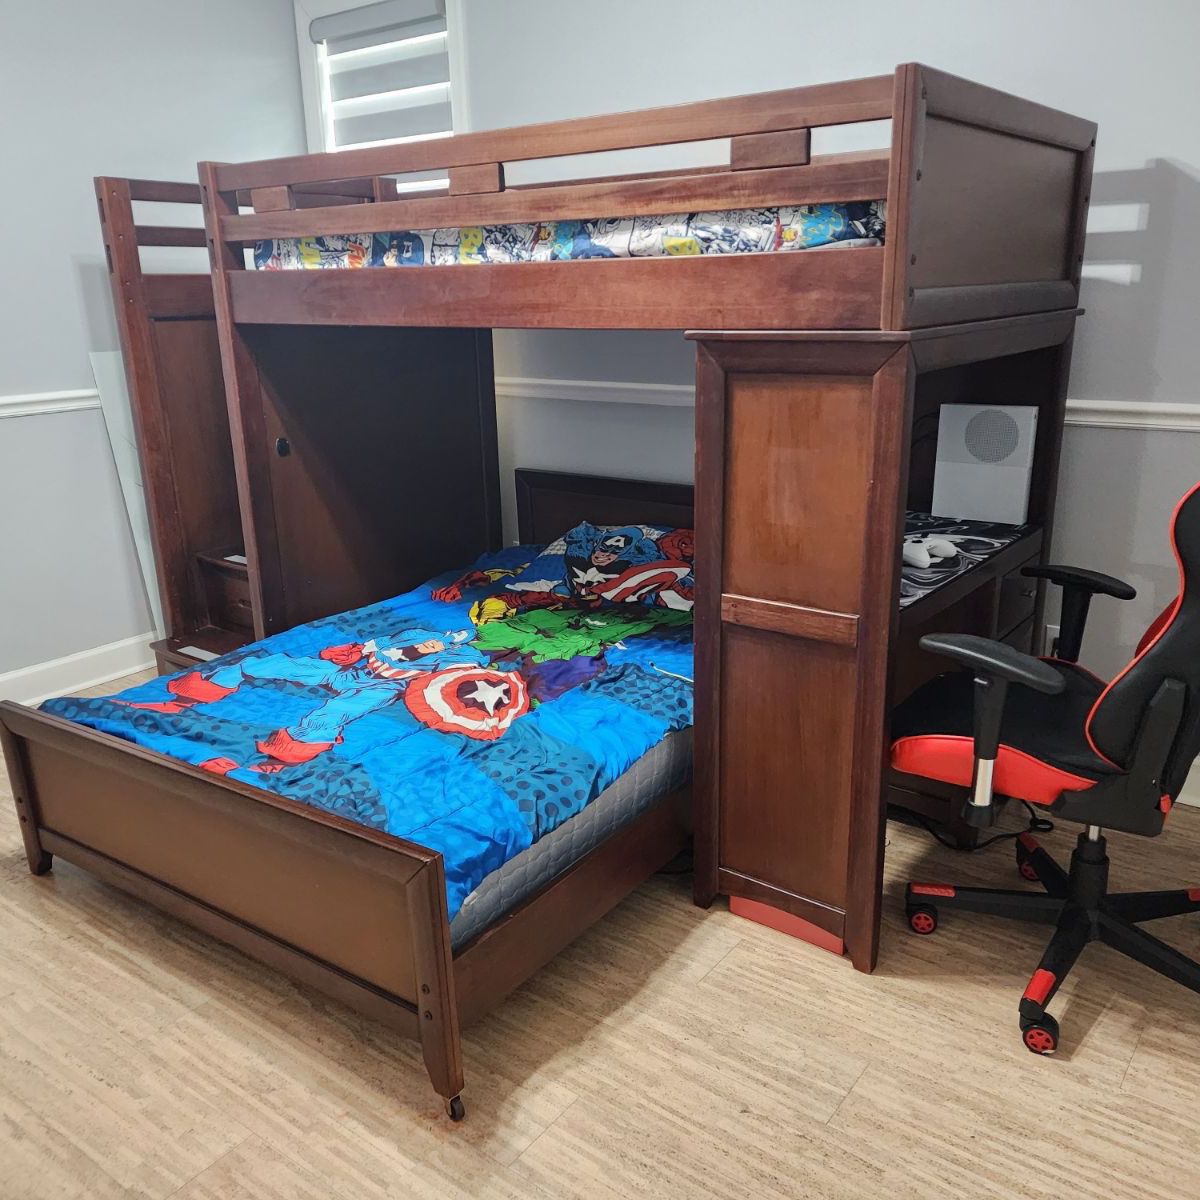 Bunk bed For Sale With Matching Dresser